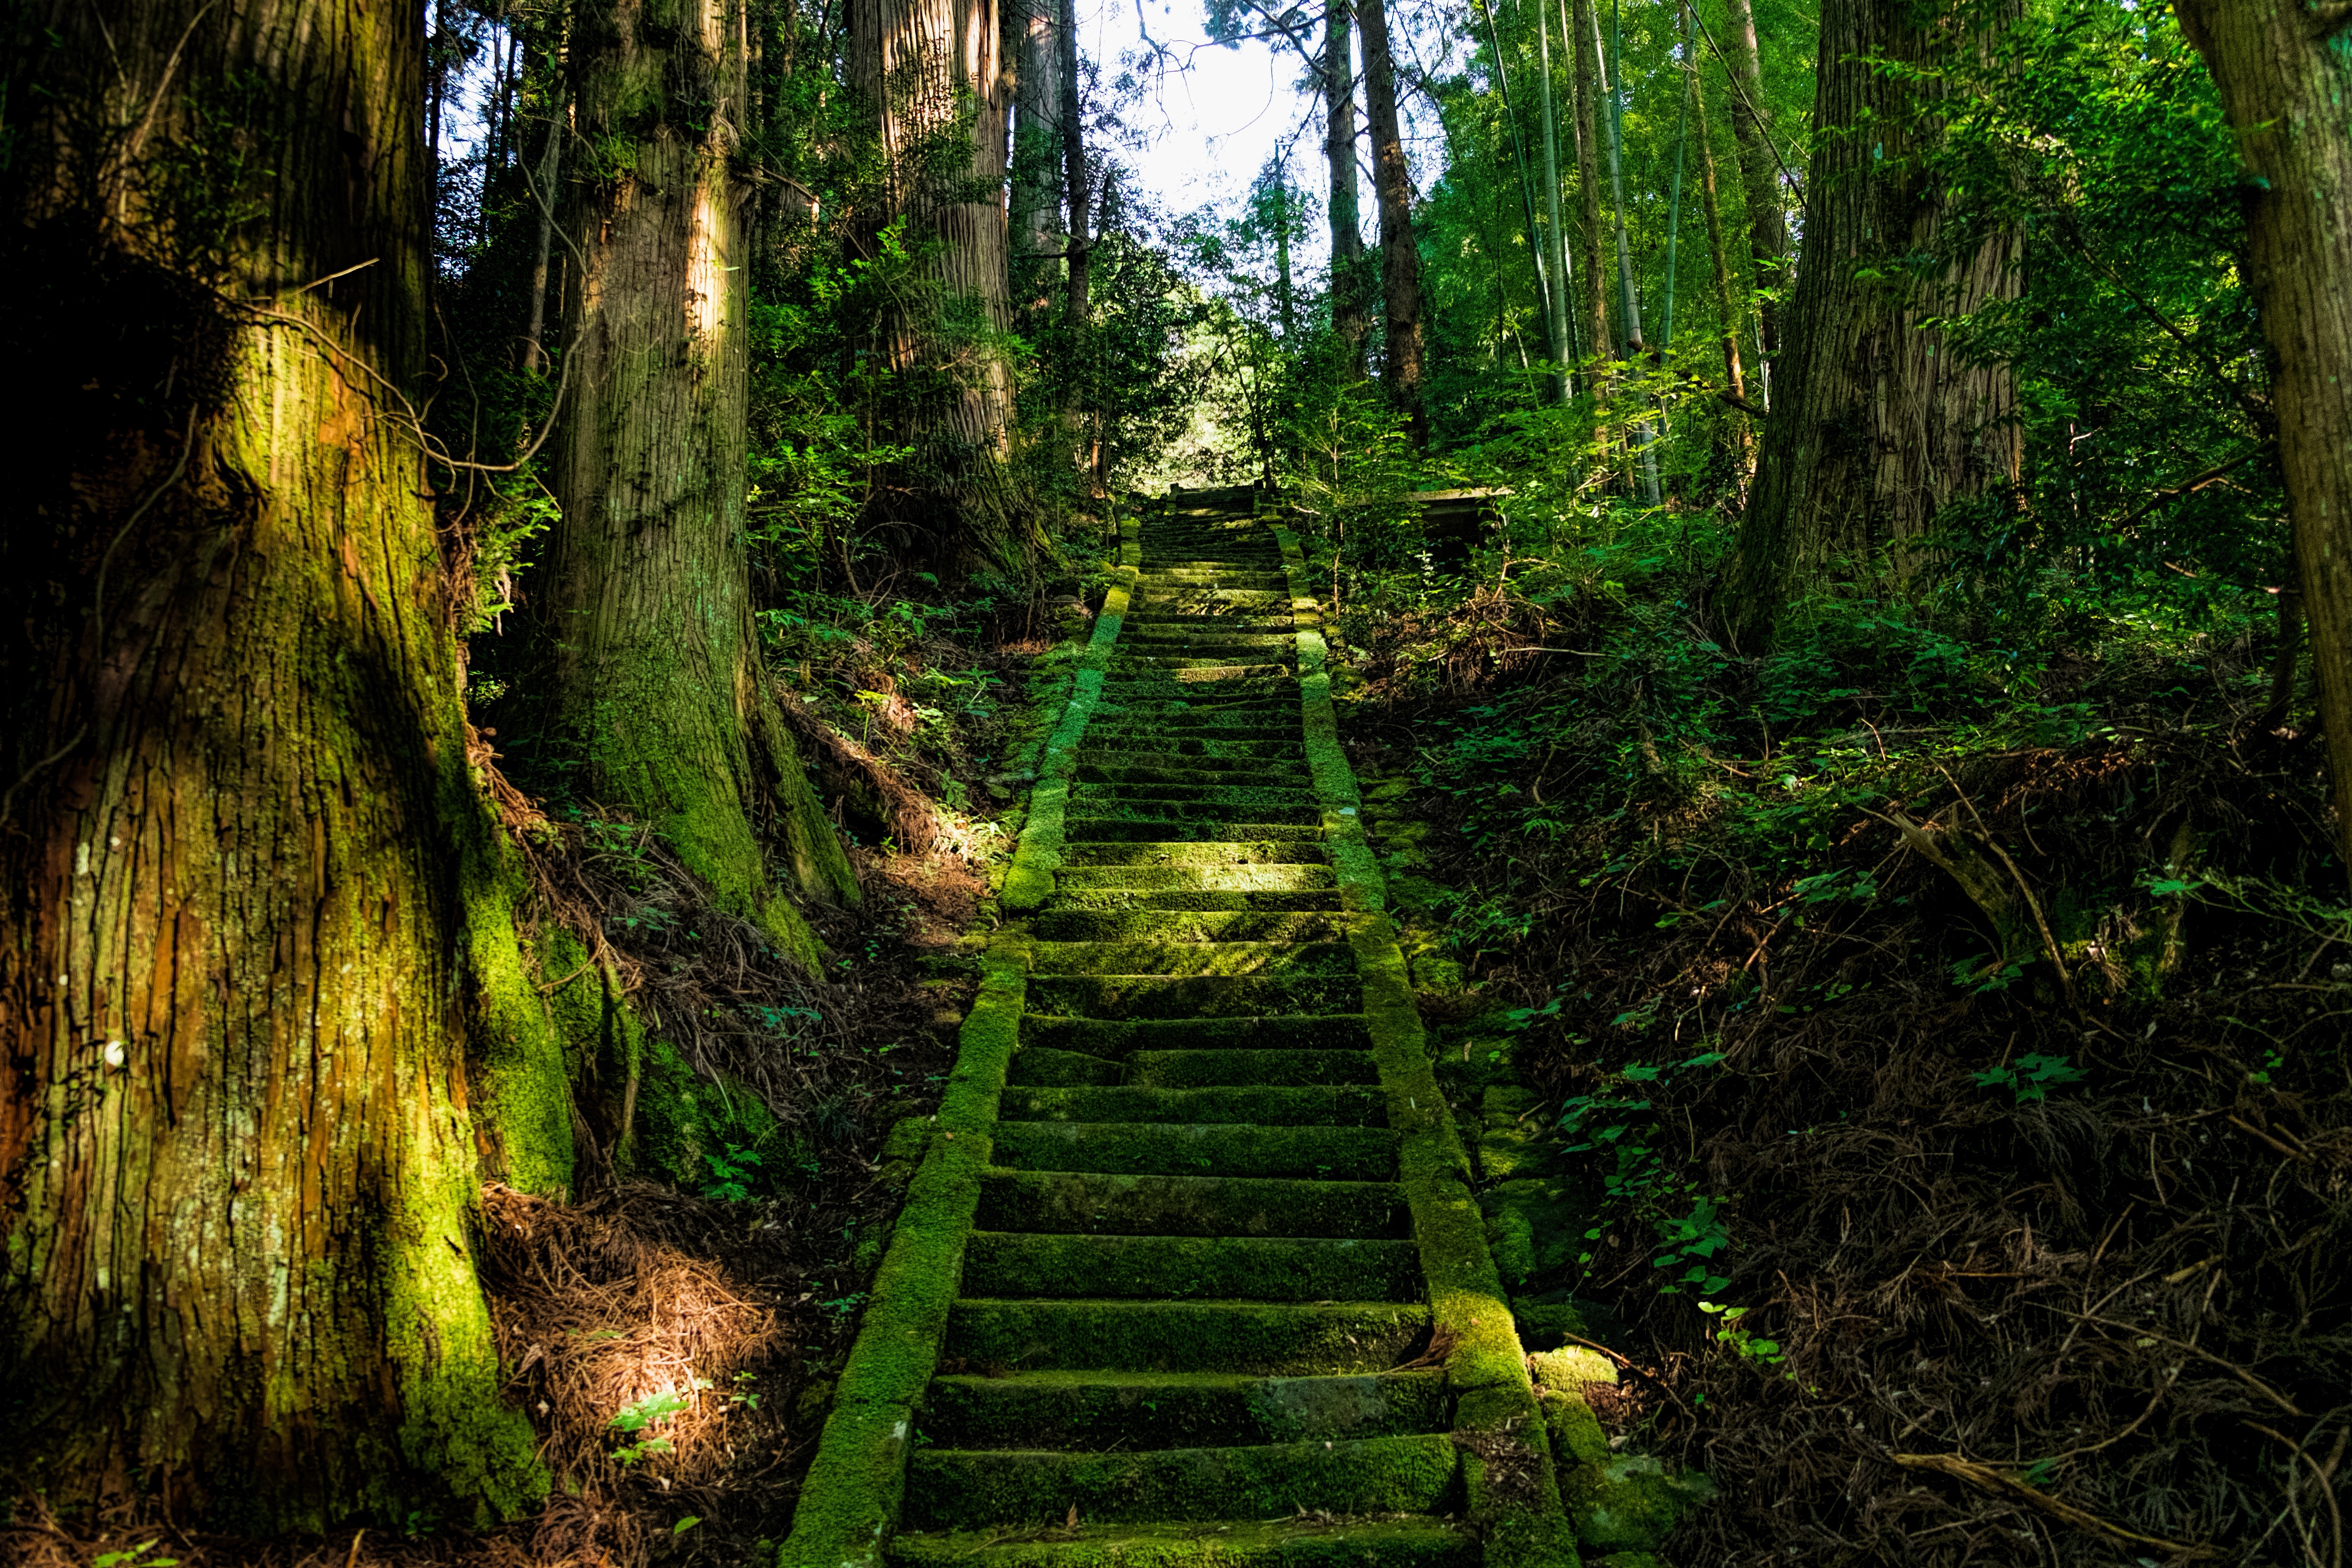 127534 download wallpaper nature, trees, stairs, ladder, moss, japan screensavers and pictures for free